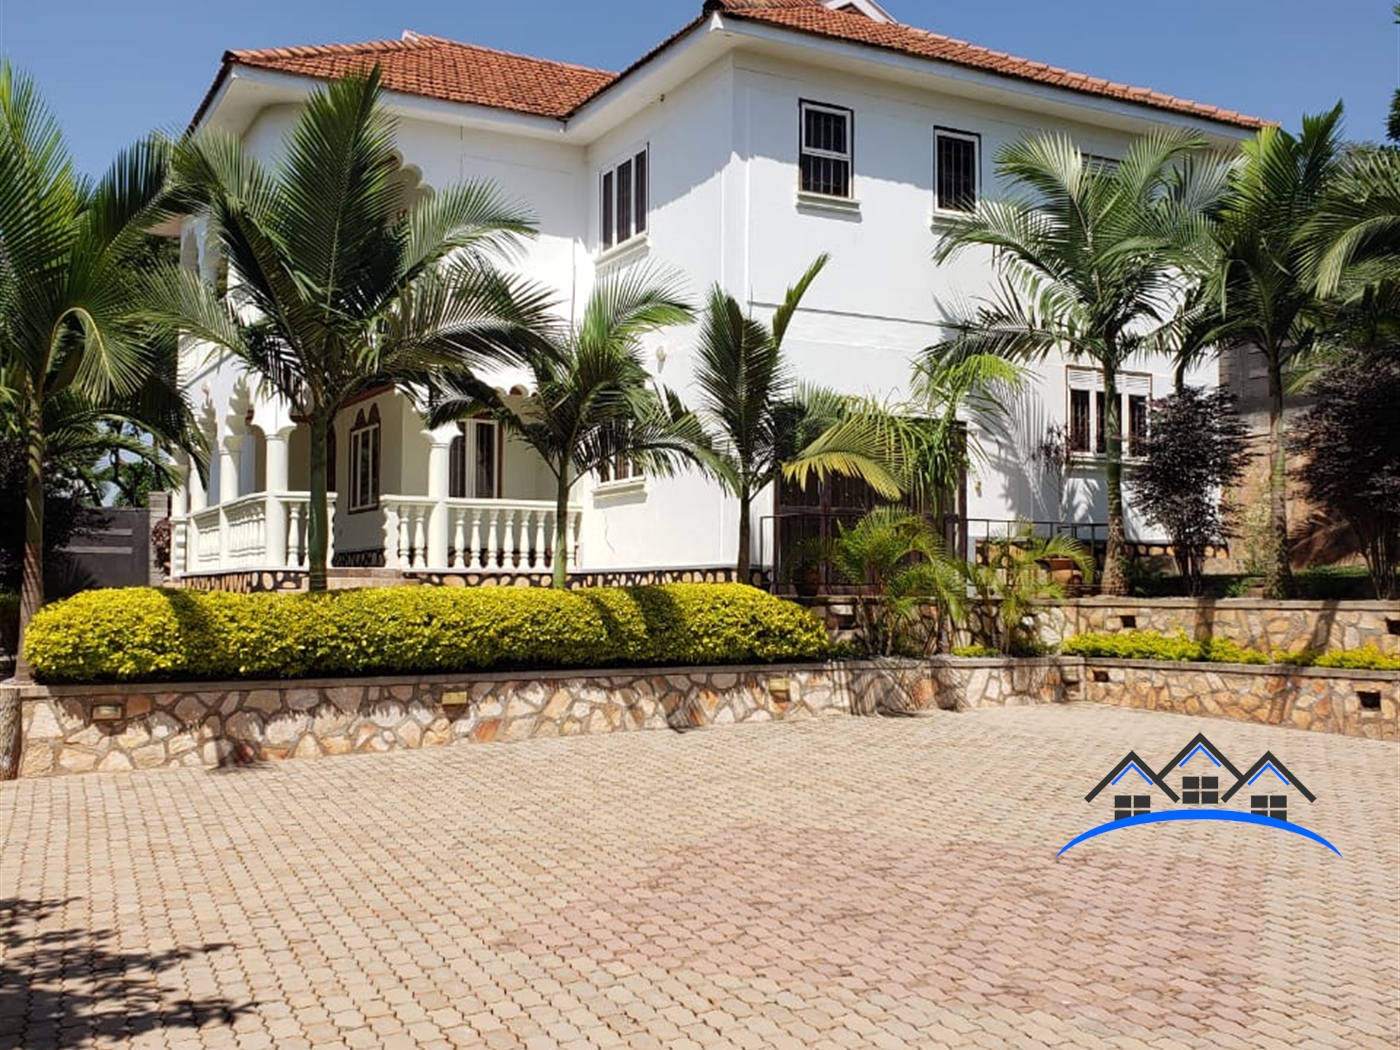 Mansion for rent in Seguku Wakiso